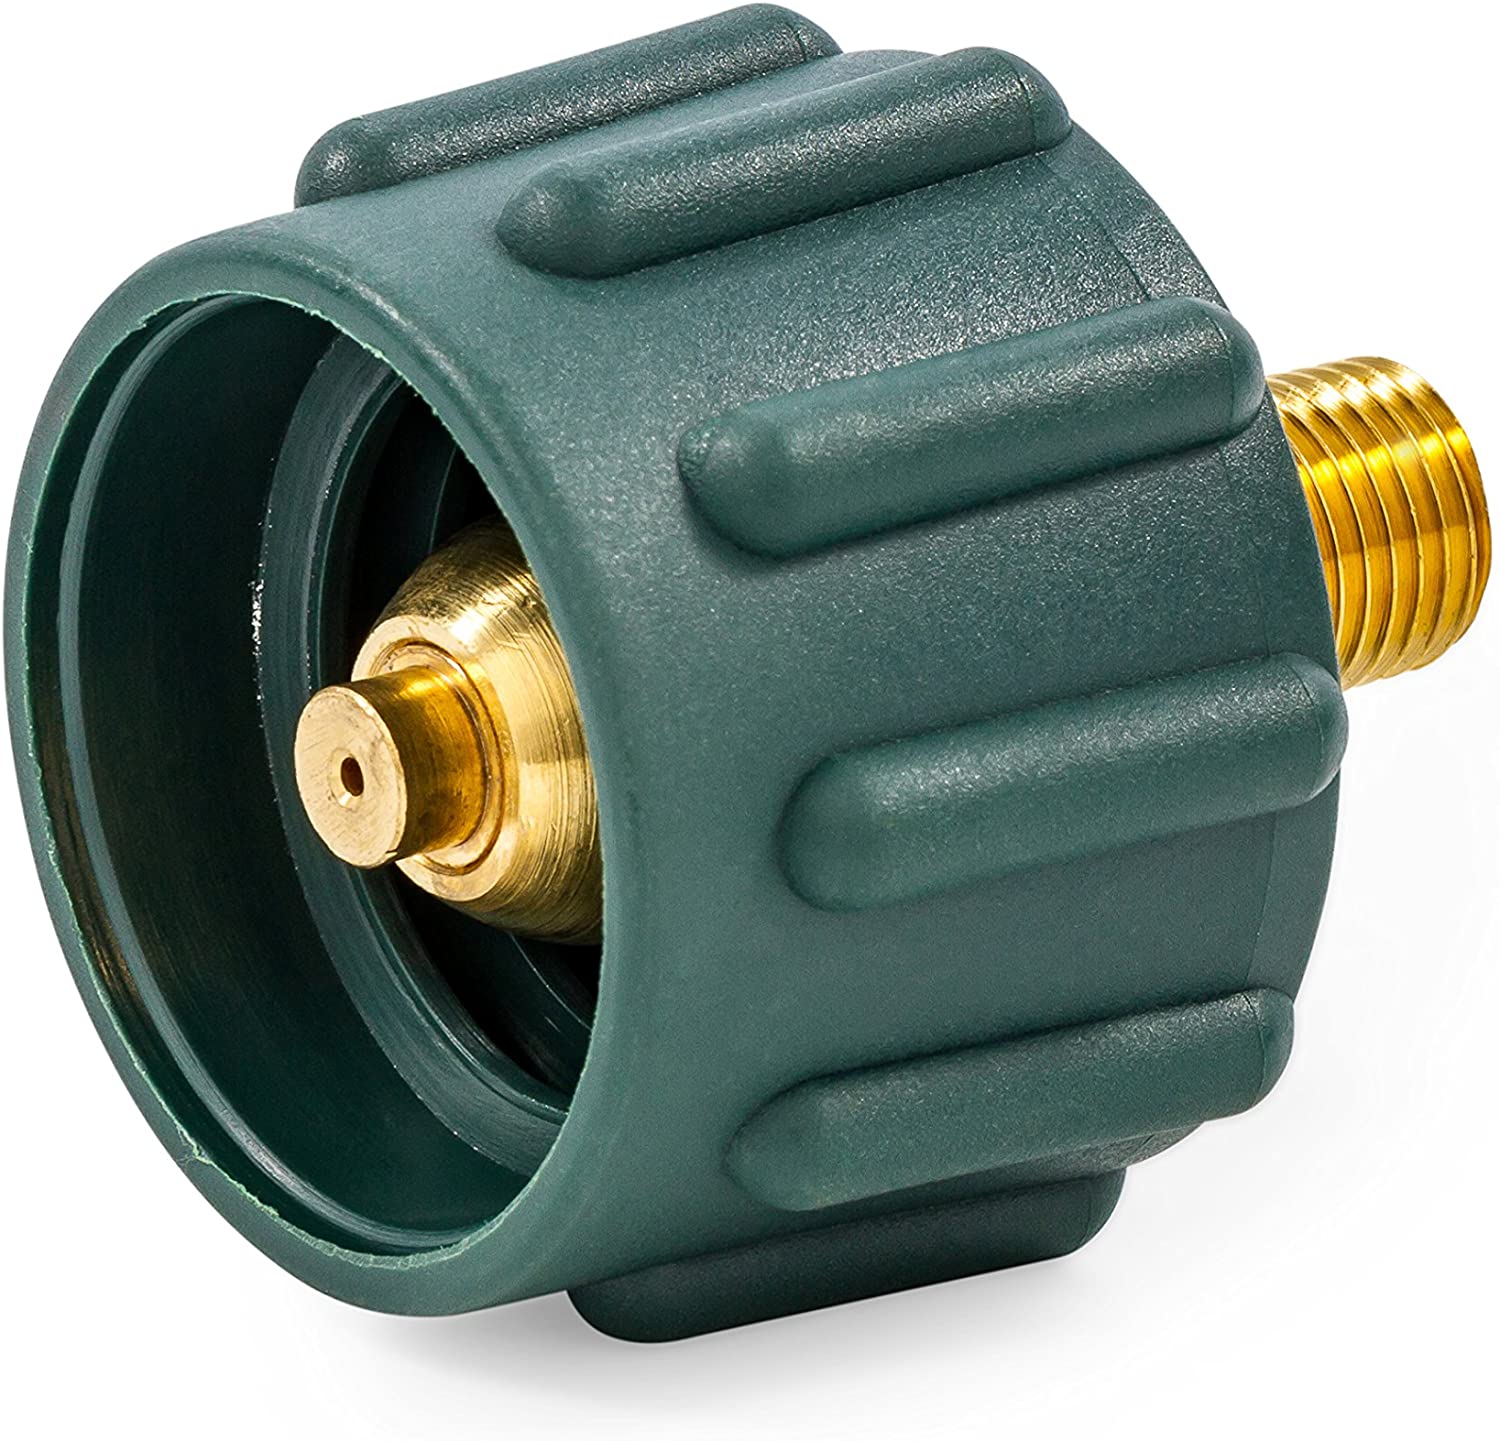 Camco 59923 Green Propane ACME Nut - Propane Tank Connector To Regulator And Hose Assembly